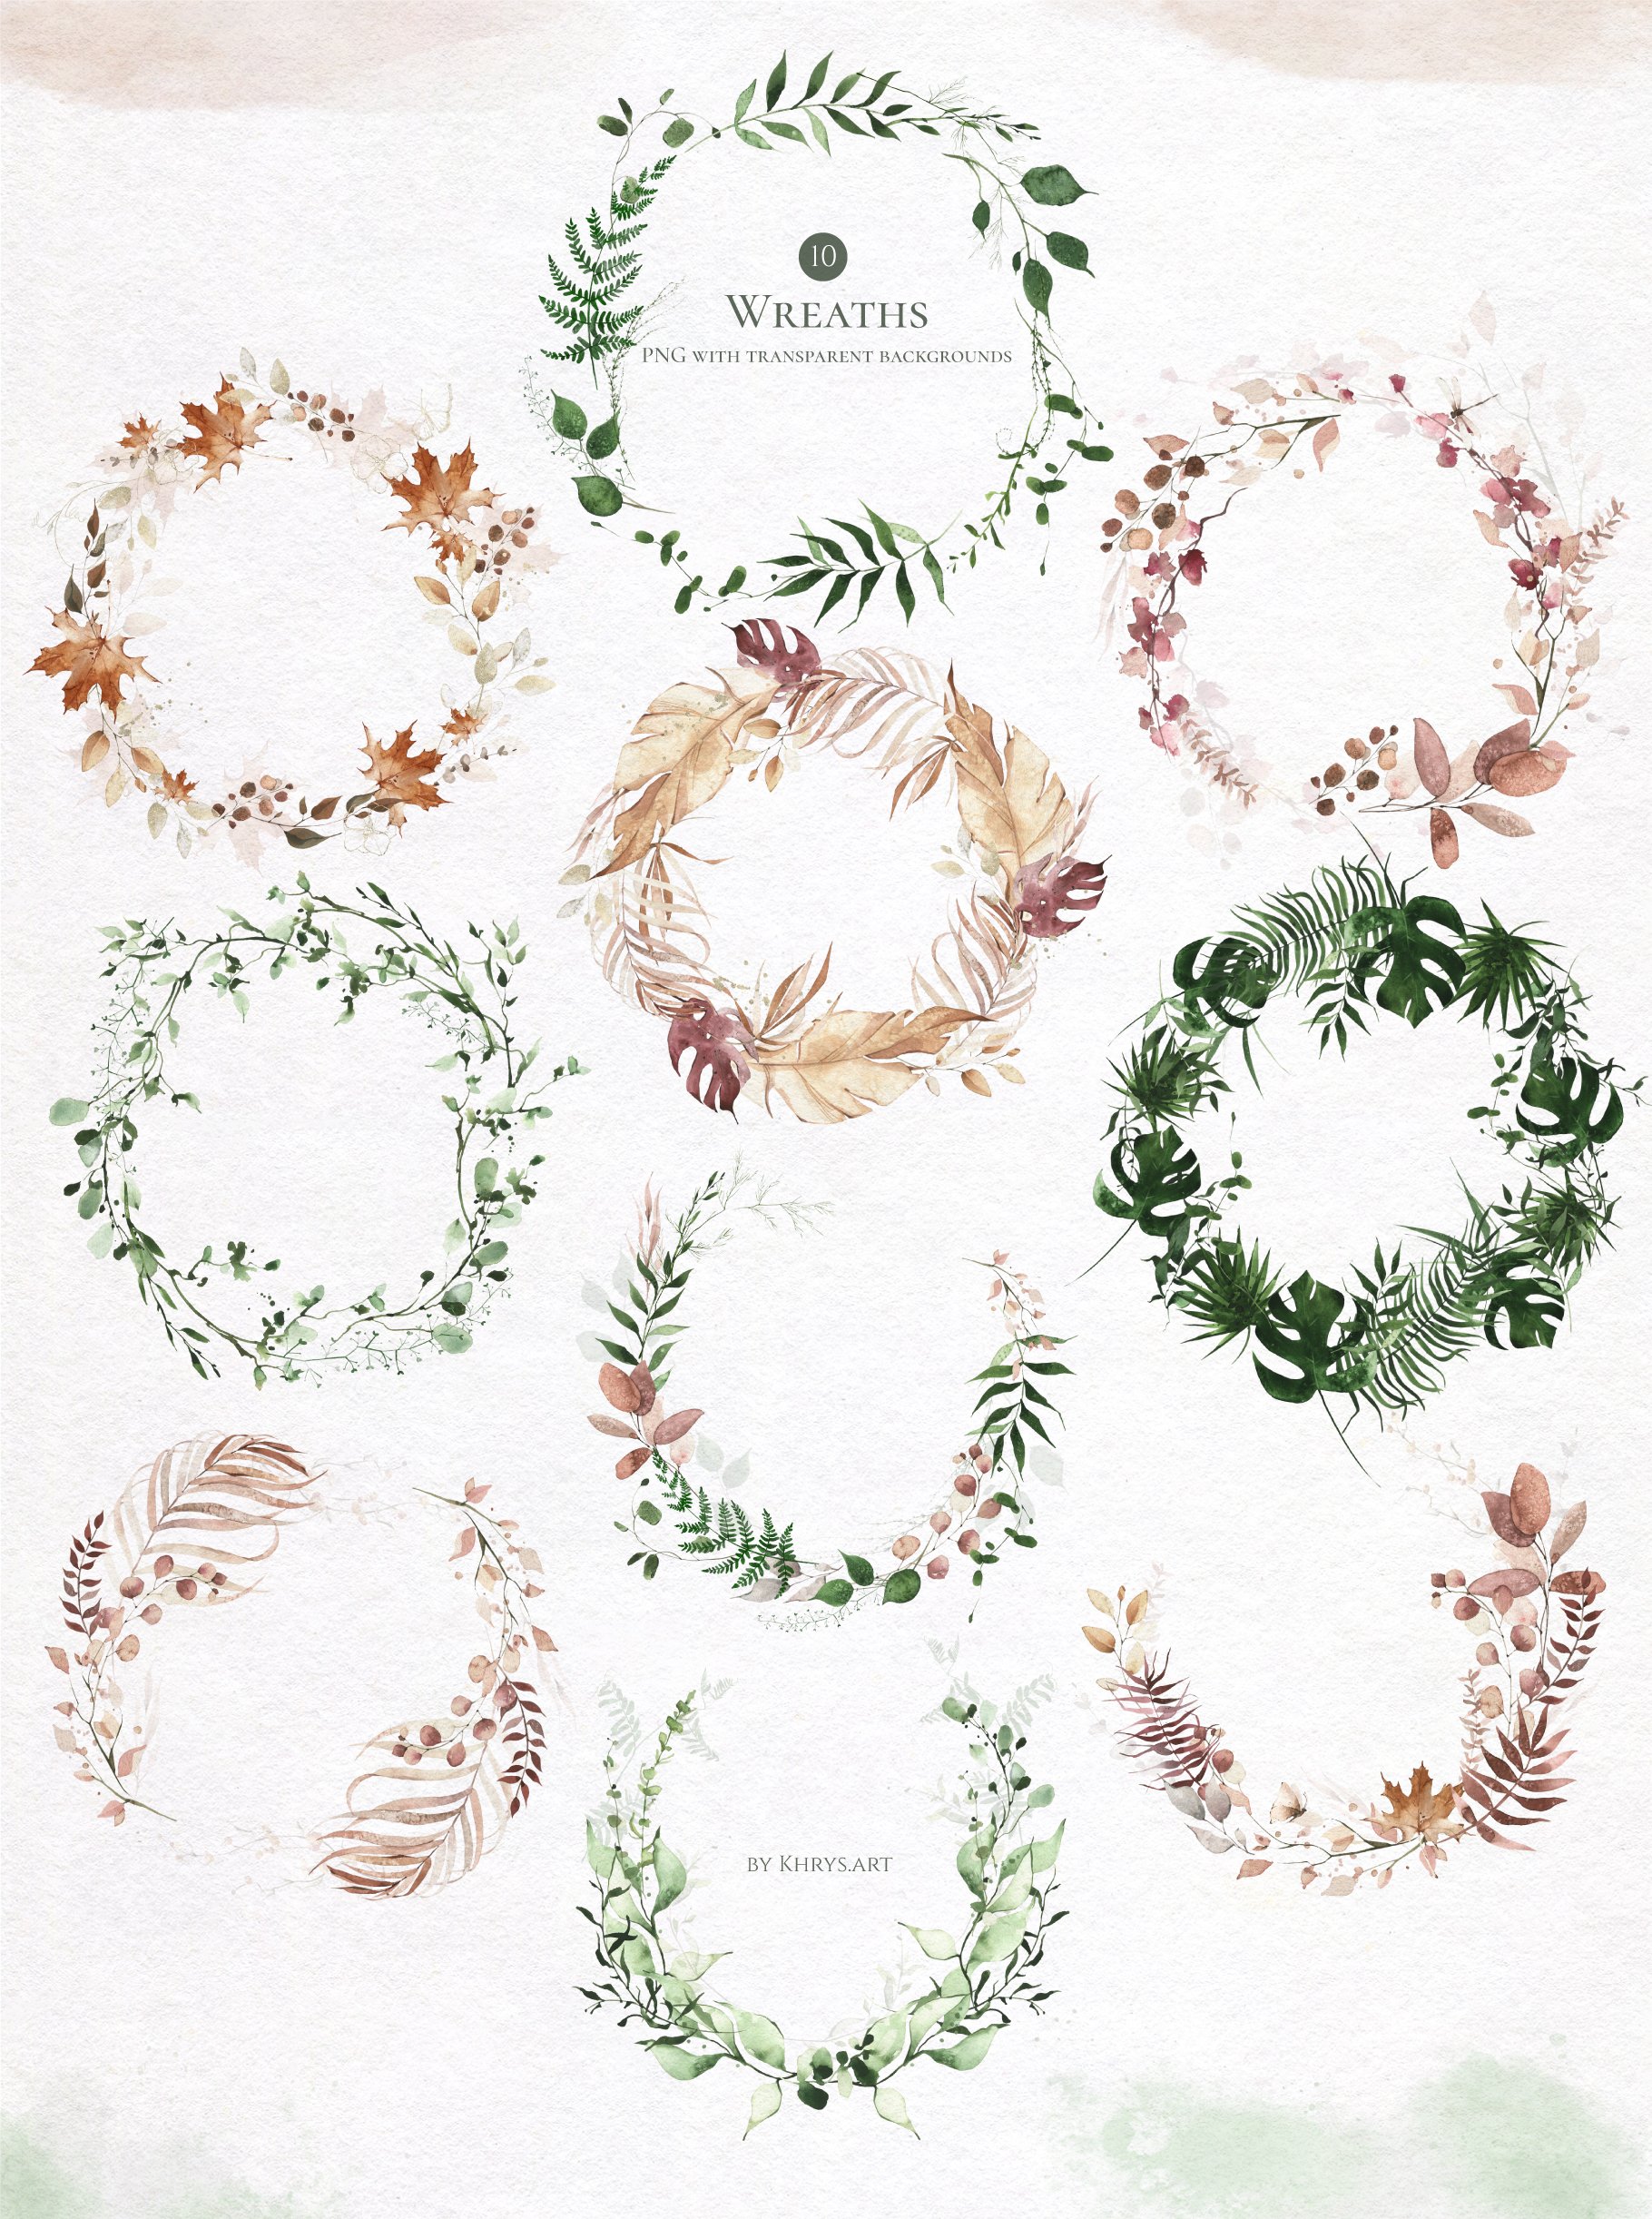 Bunch of watercolor wreaths on a white background.